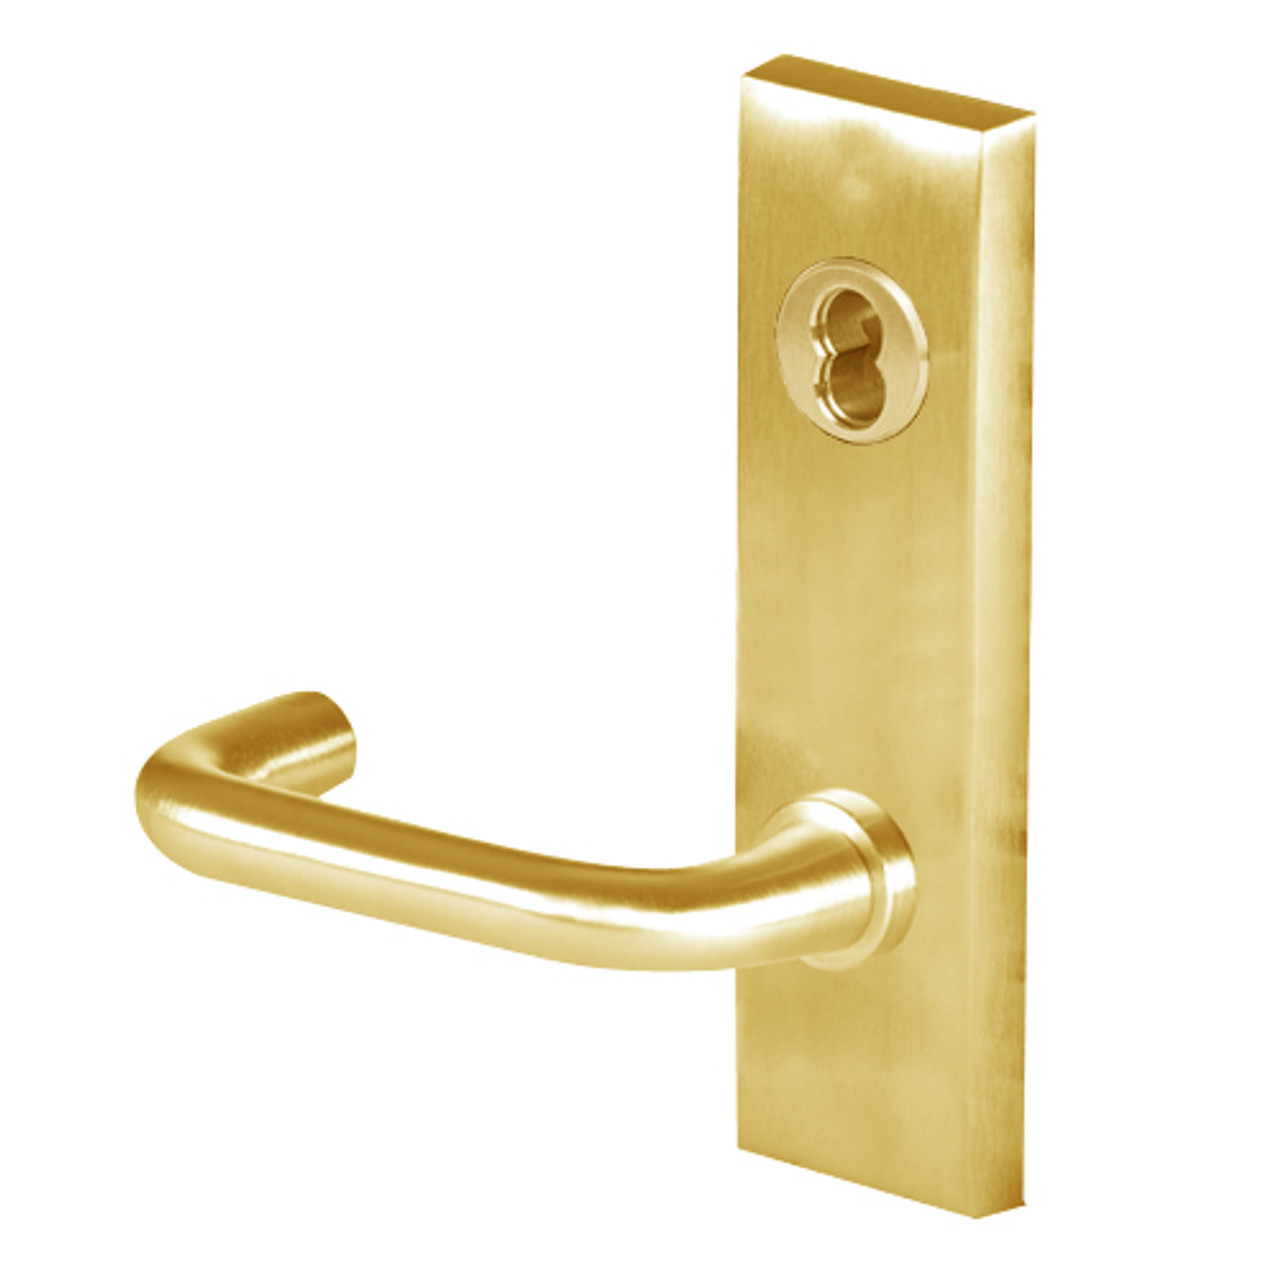 45H7B3M605 Best 40H Series Entrance with Deadbolt Heavy Duty Mortise Lever Lock with Solid Tube Return Style in Bright Brass